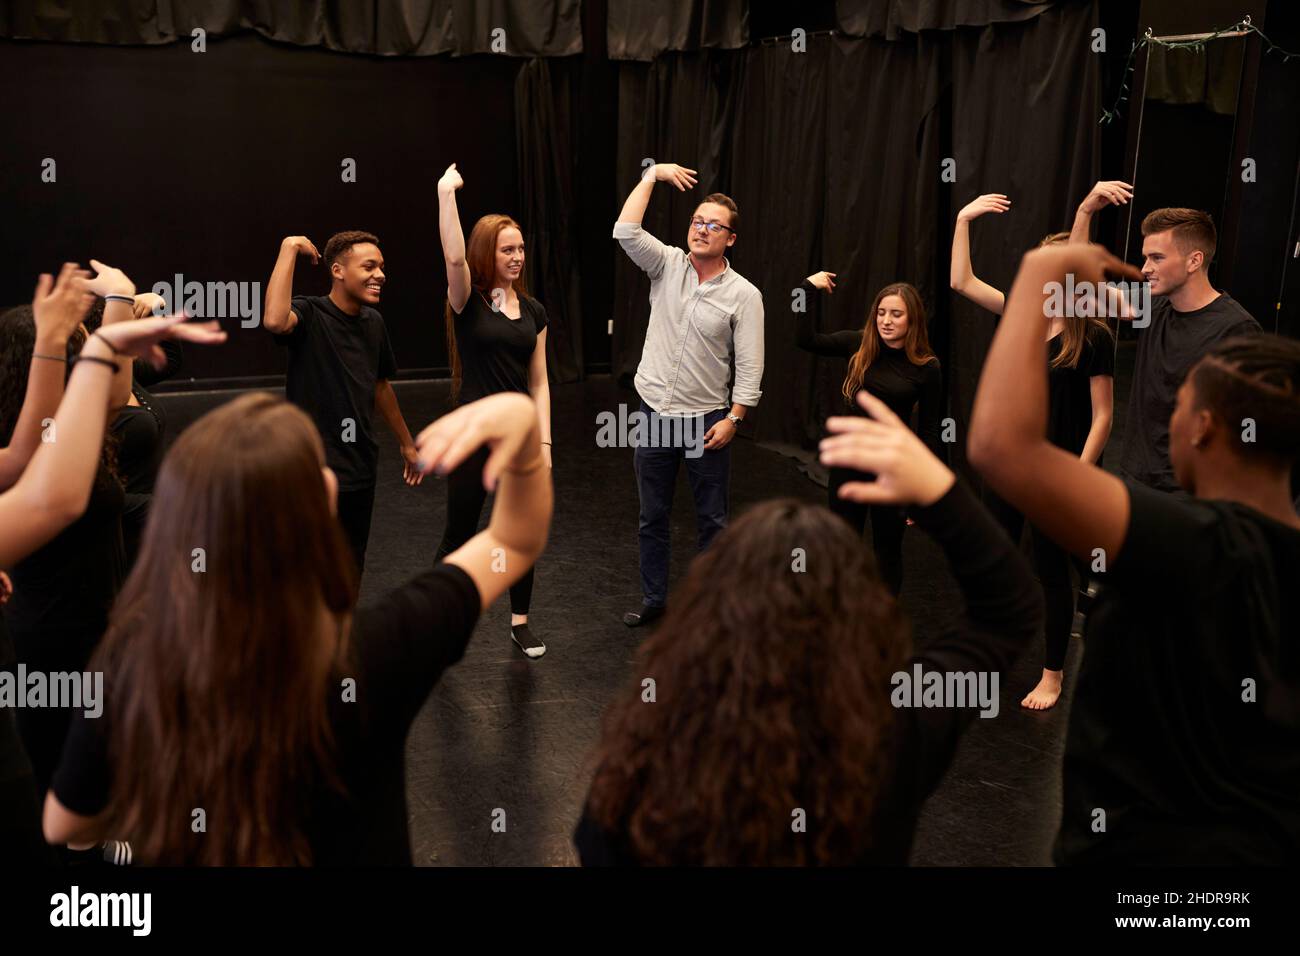 education, class, theatrical performance, educations, theatrical performances Stock Photo